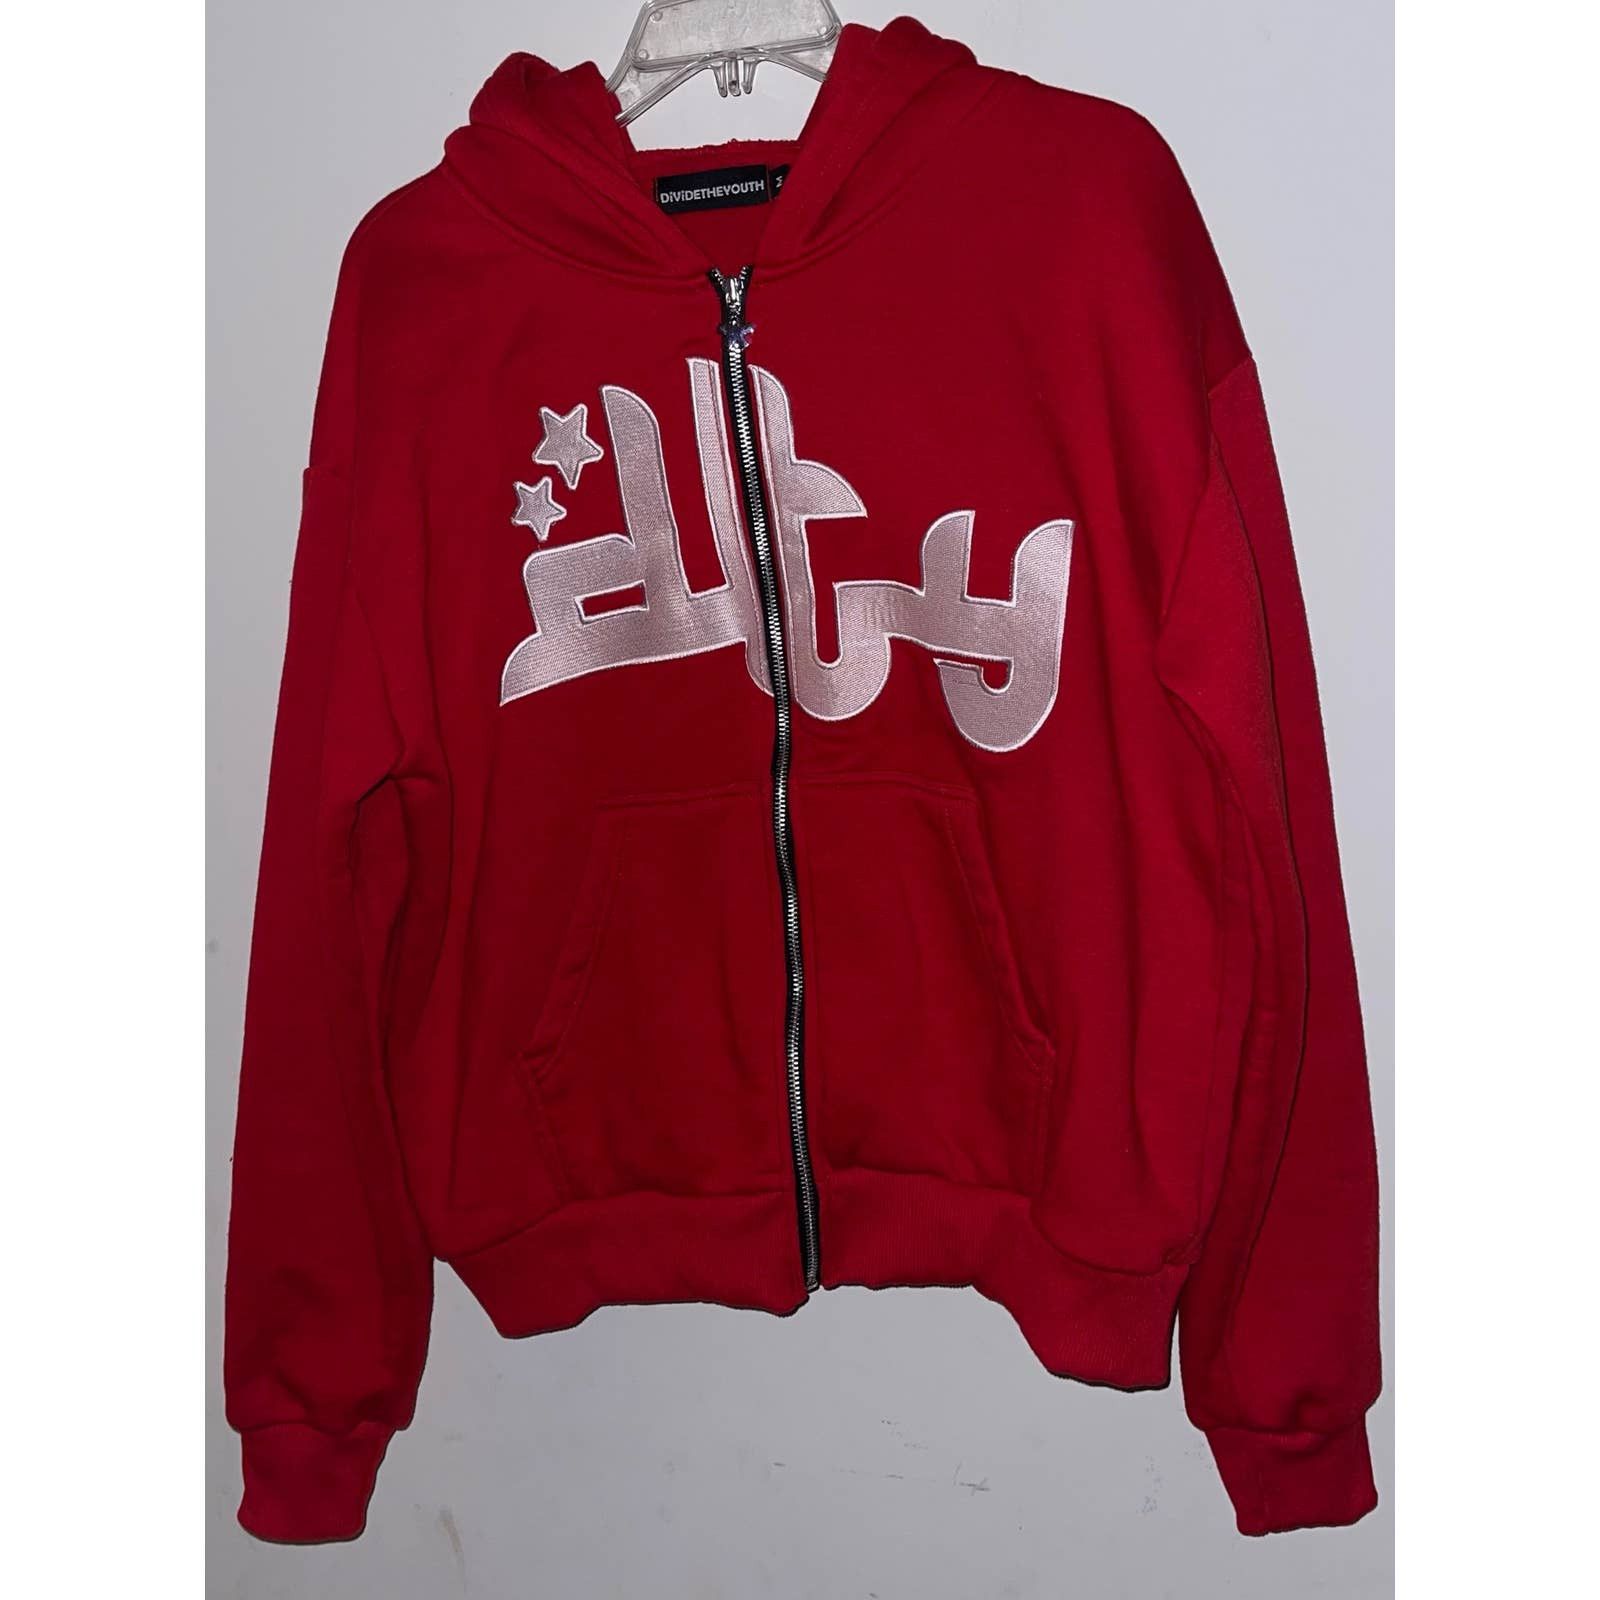 Divide The Youth Divide The Youth Full Zip Hoodie Jacket Red Size ...